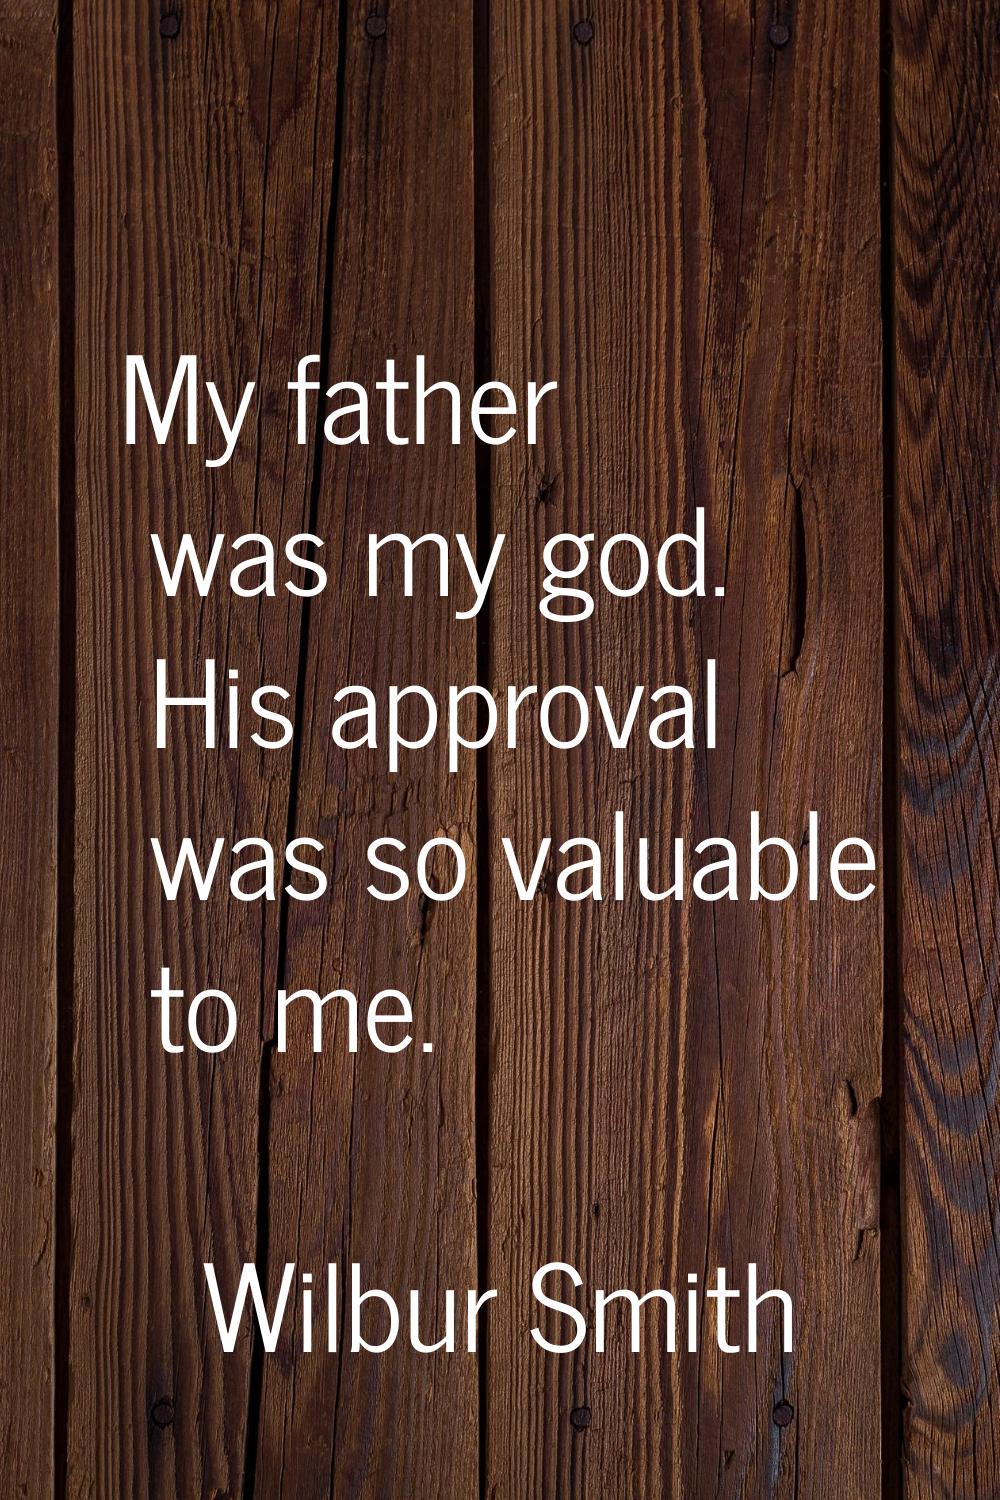 My father was my god. His approval was so valuable to me.